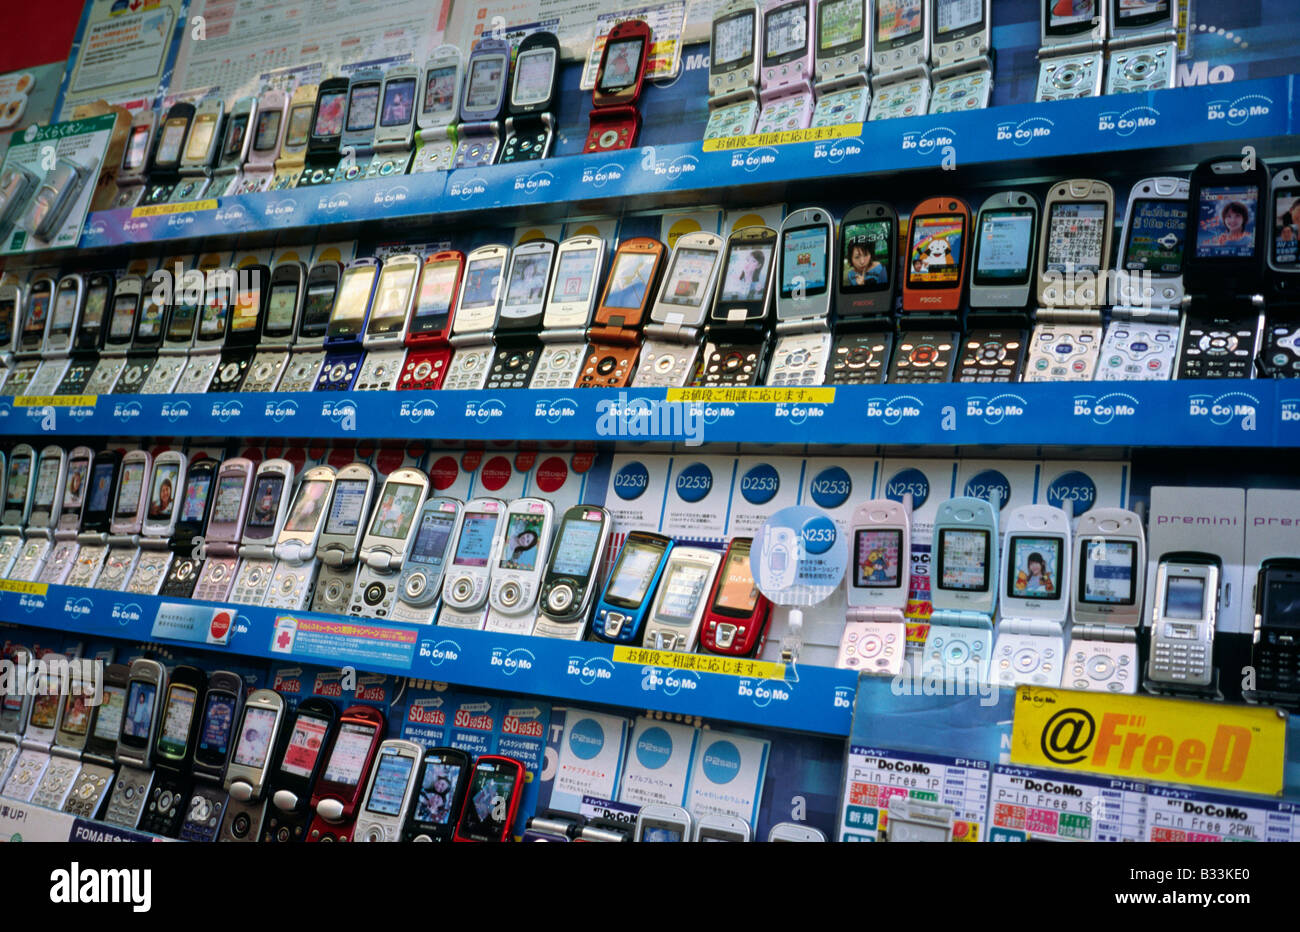 Nov 7, 2004 - Consumers are spoilt for choice at this mobile phone retailer in Tokyo's Akihabara, better known as Electric Town. Stock Photo